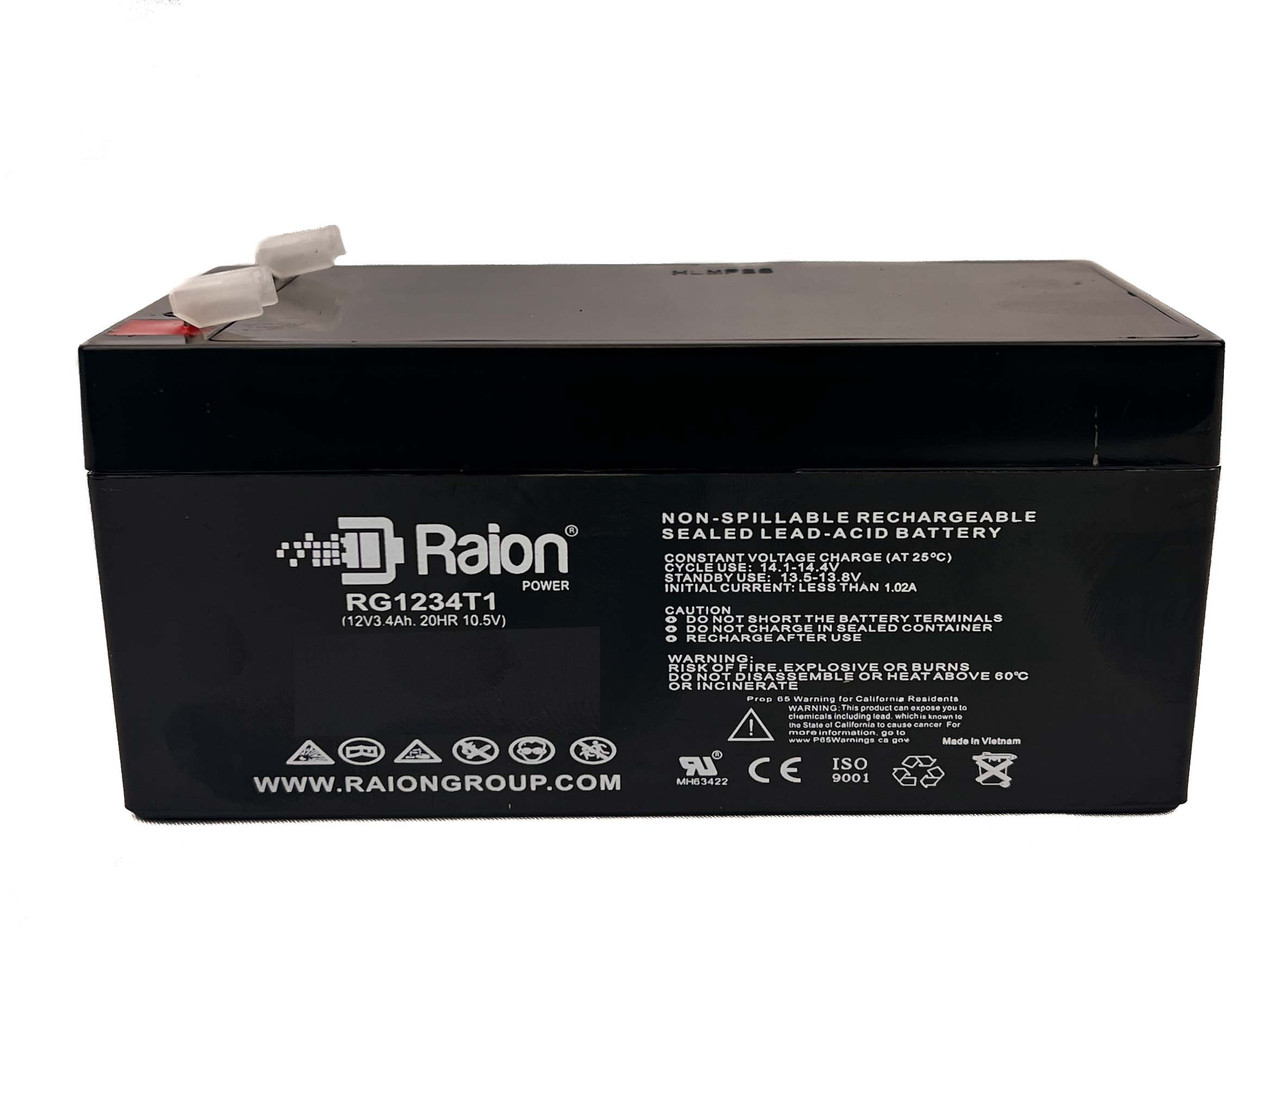 Raion Power RG1234T1 Rechargeable Compatible Replacement Battery for Nellcor Puritan Bennett N-6000 Monitor